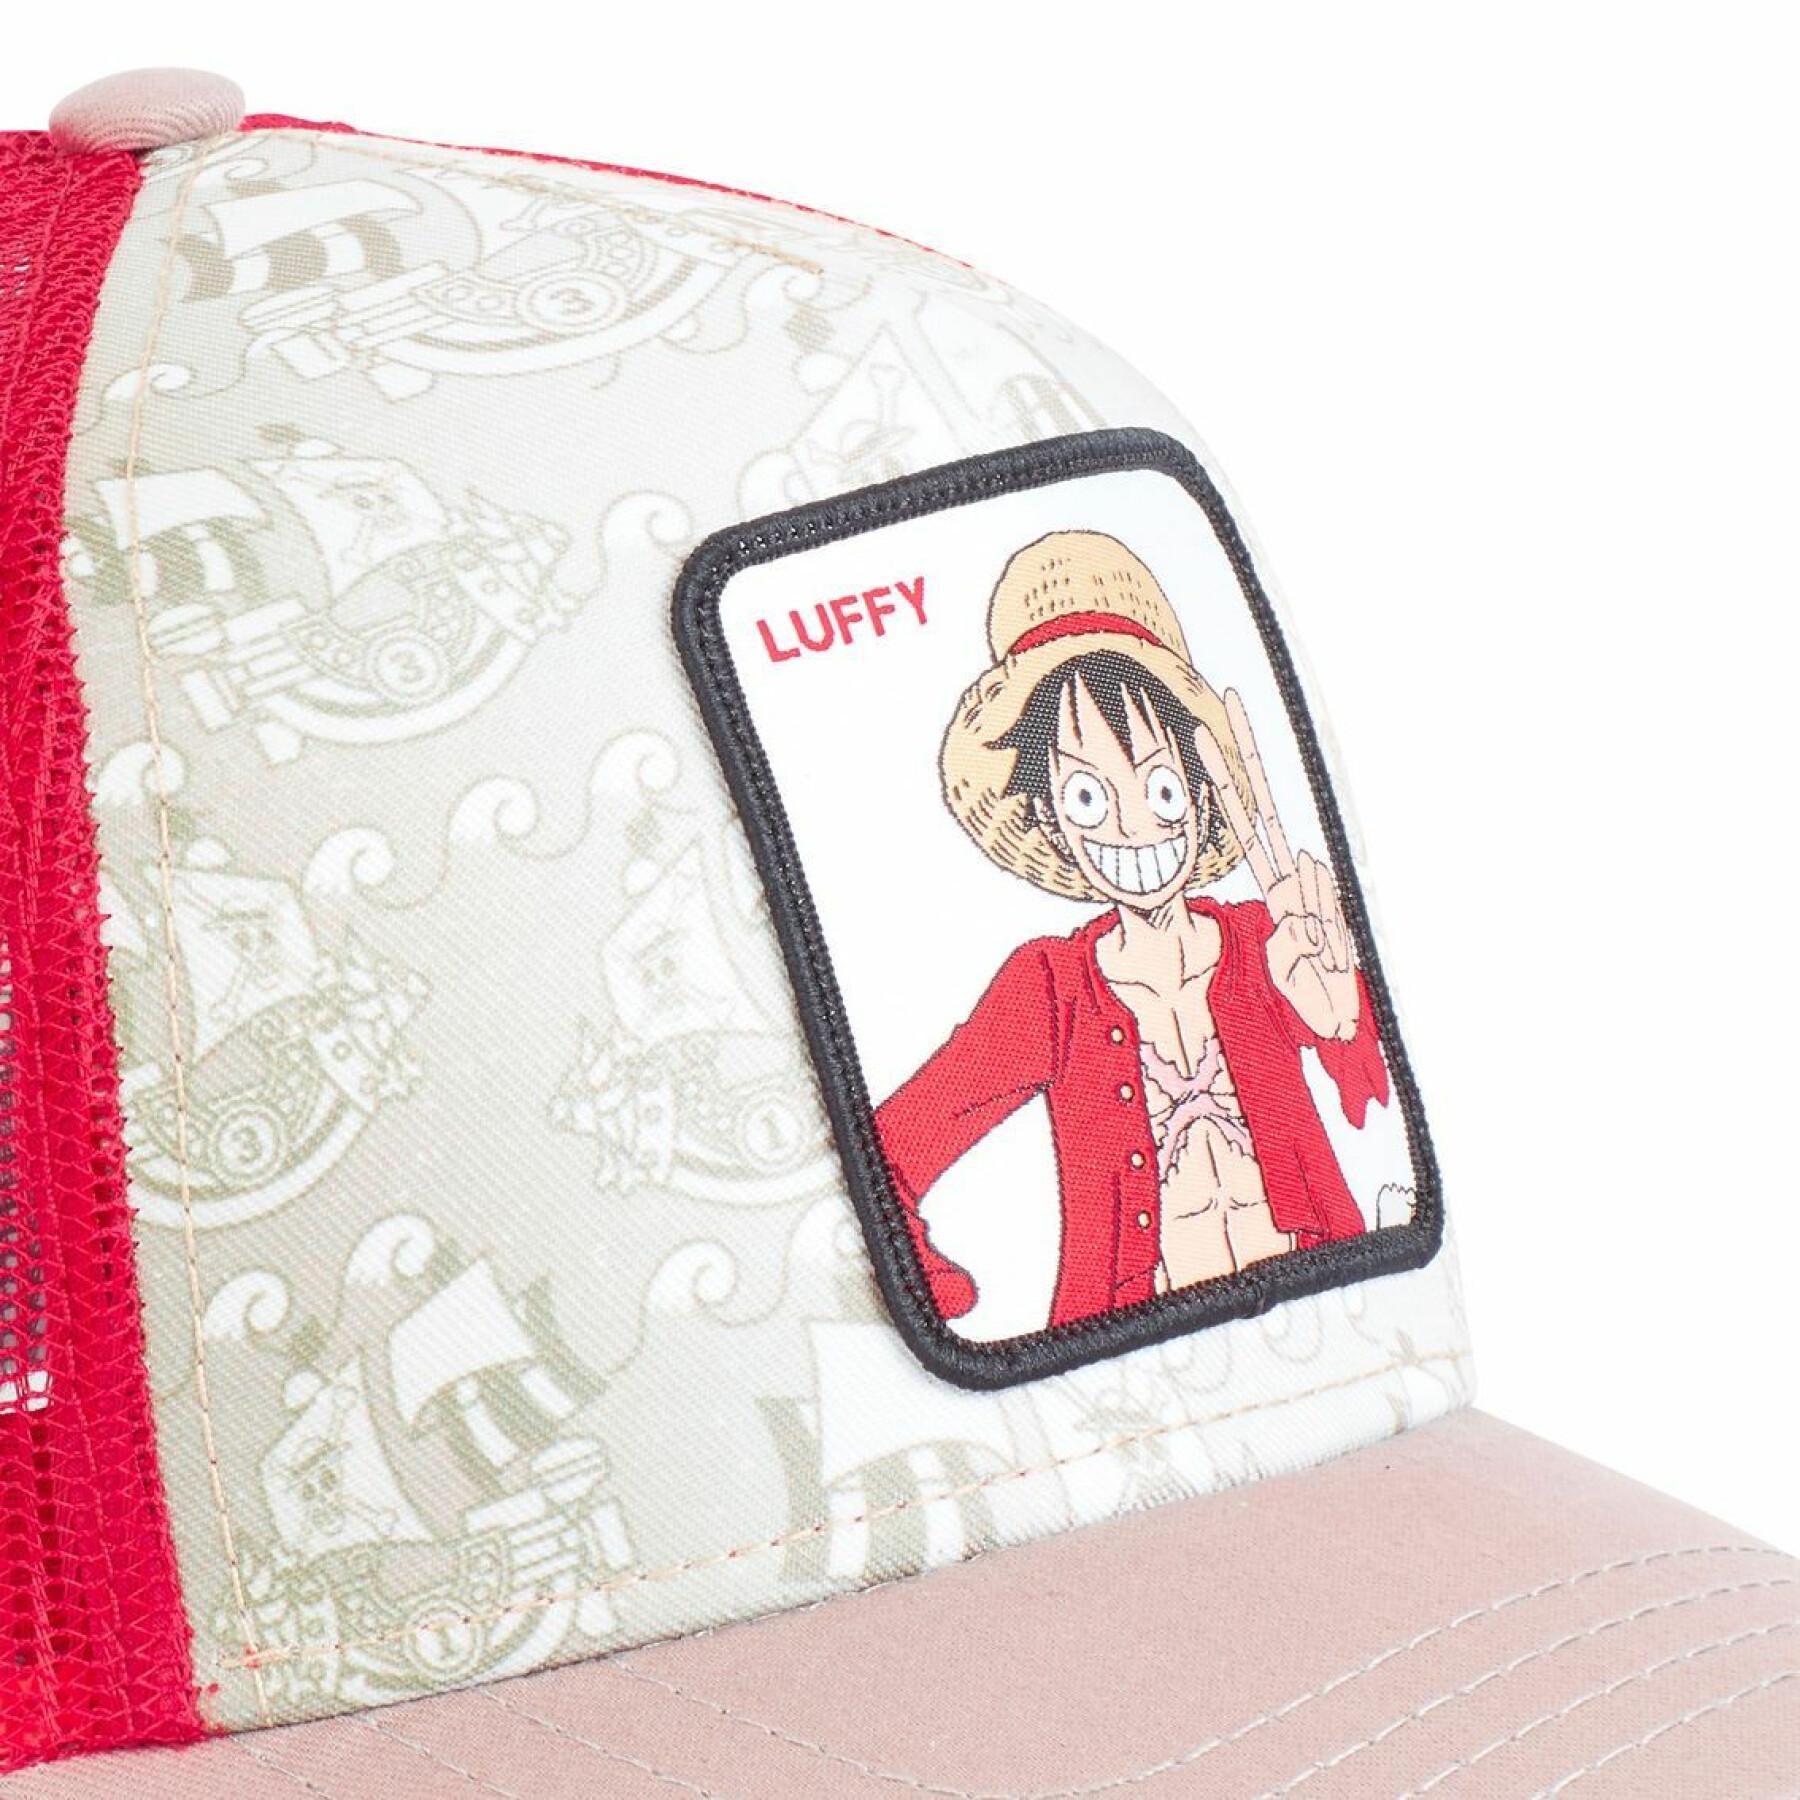 Casquette Capslab One Piece Luffy